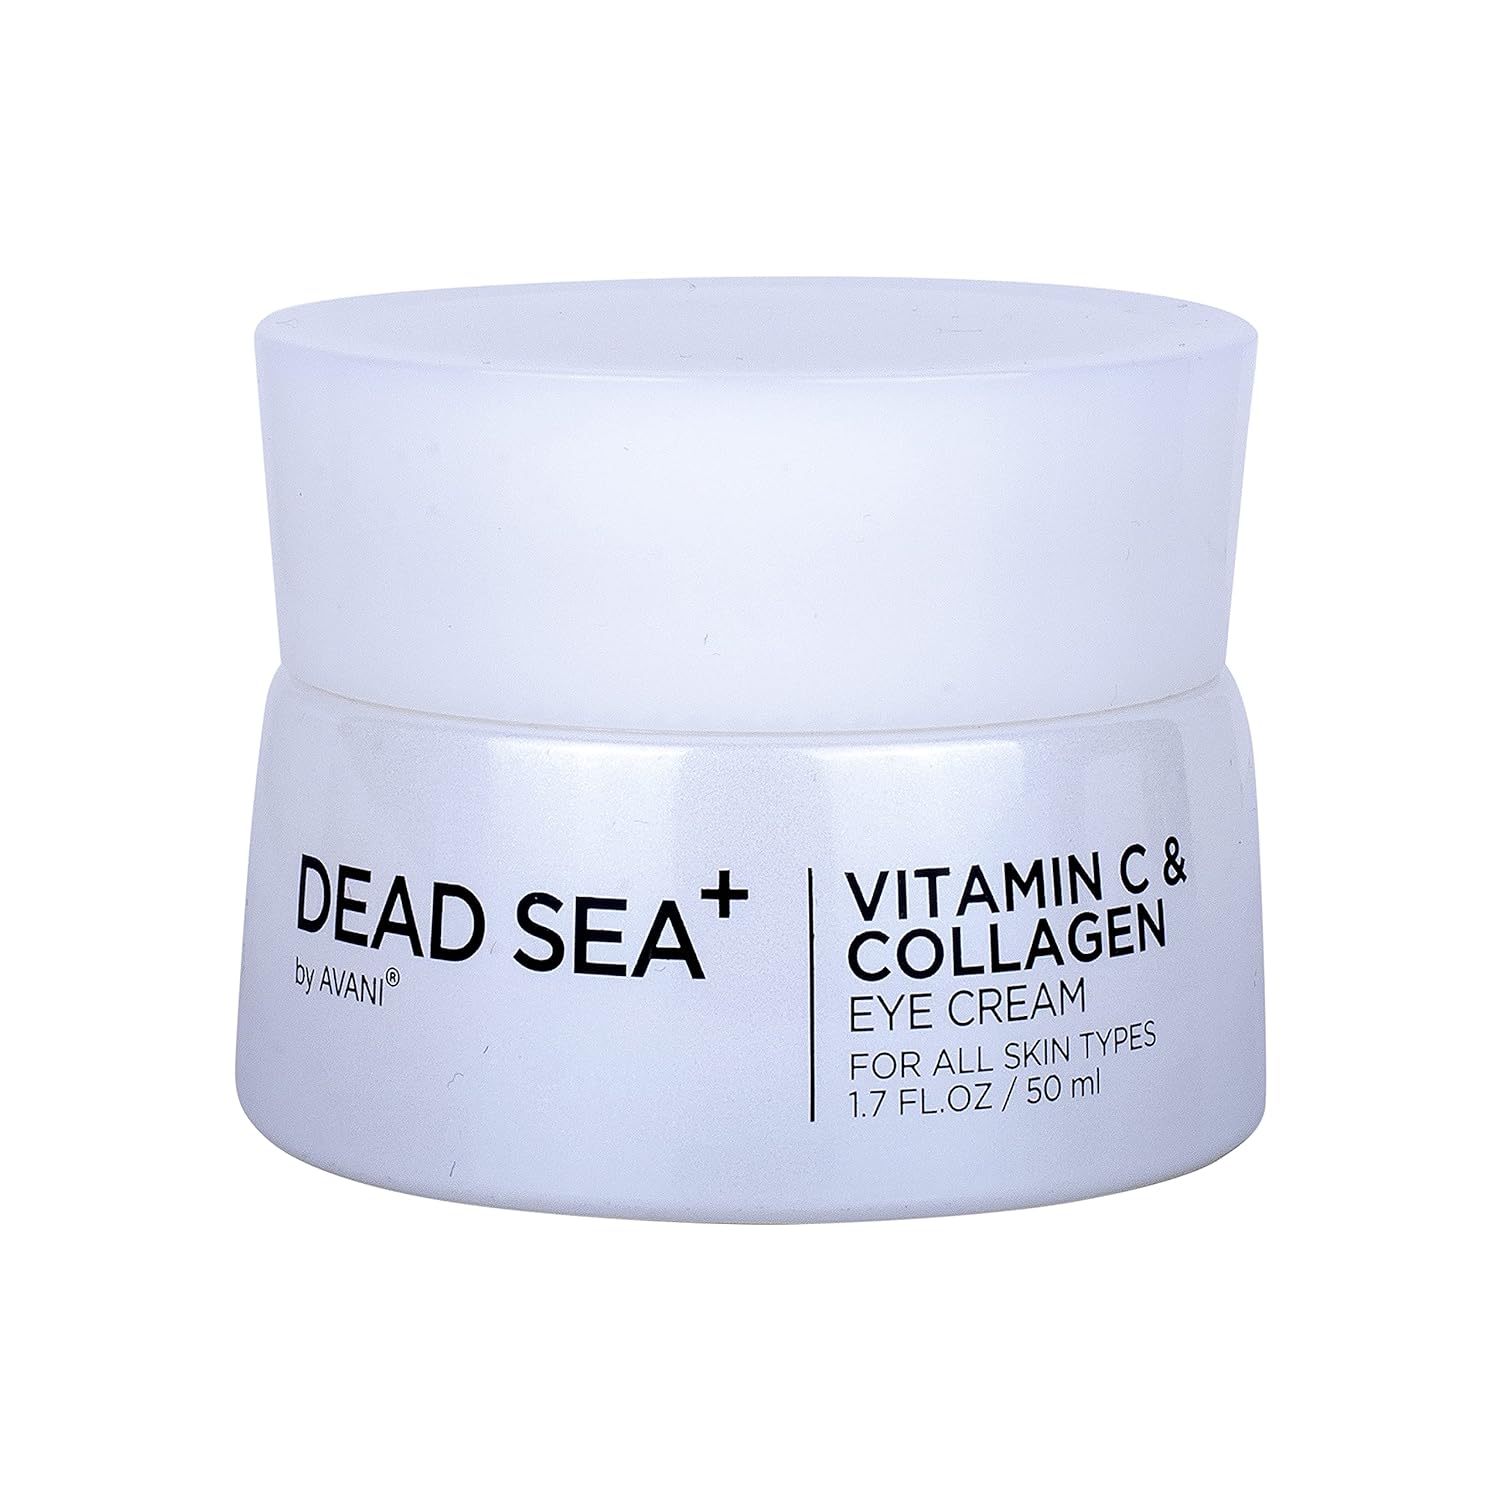 Dead Sea+ by AVANI VITAMIN C & COLLAGEN EYE CREAM | Targets Typical Signs Of Aging, Improves Skin Elasticity, Reduces Fine Lines And Wrinkles | Dead Sea Minerals, Collagen, And Vitamin C - 1.7